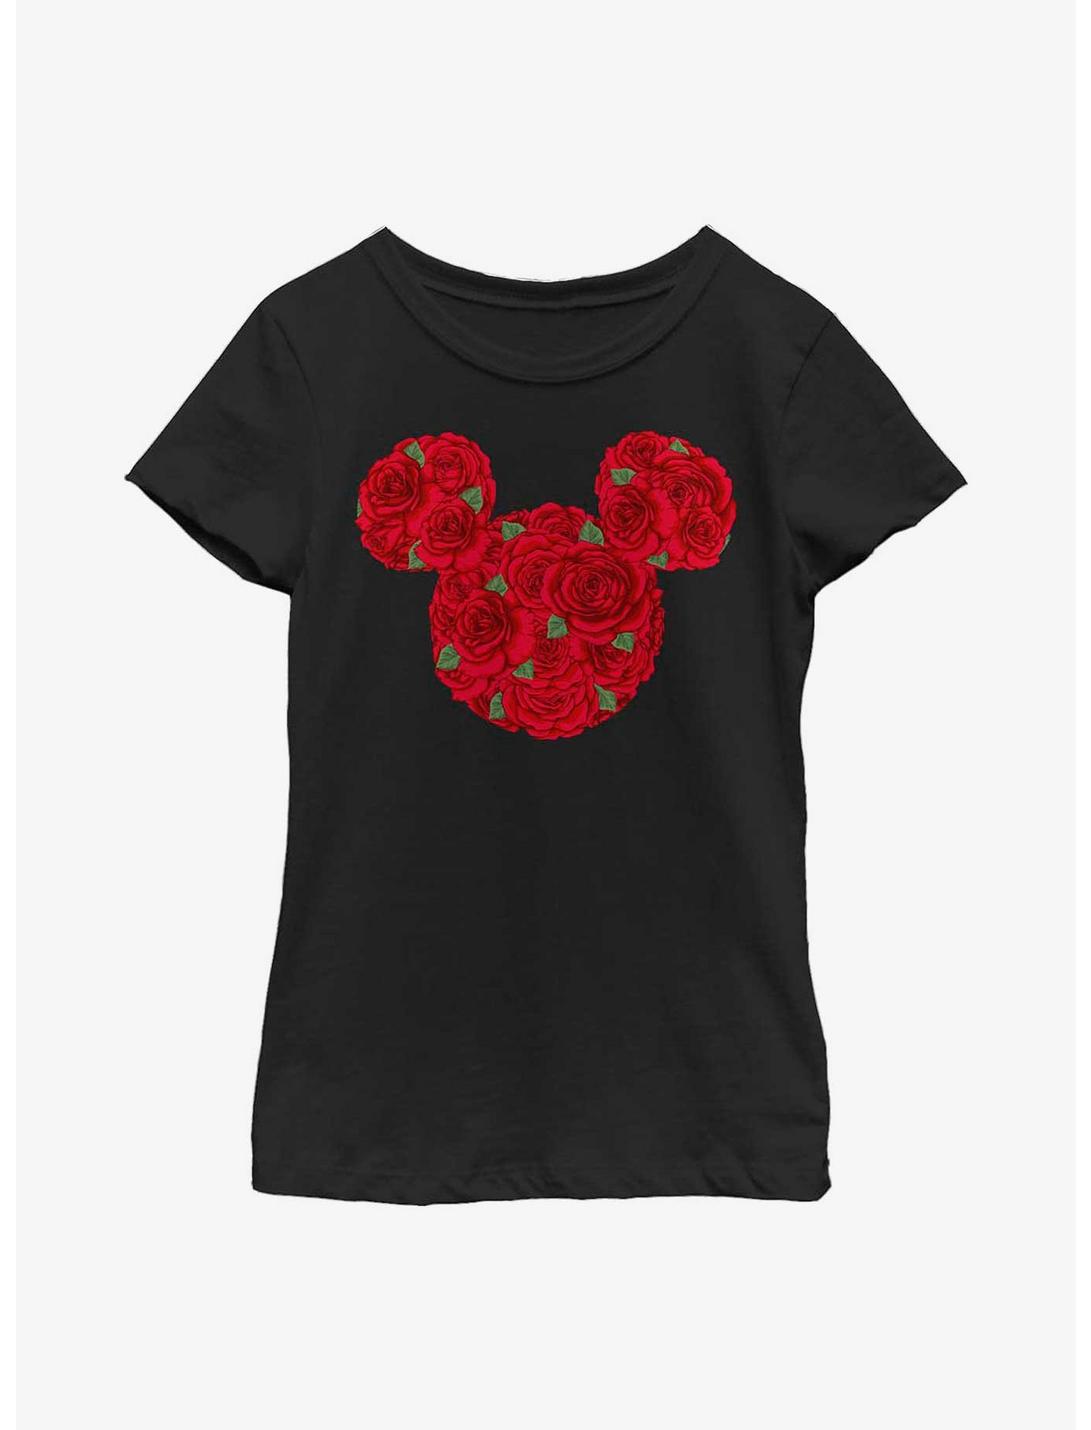 Disney Minnie Mouse Mickey Mouse Roses Youth Girls T-Shirt, BLACK, hi-res